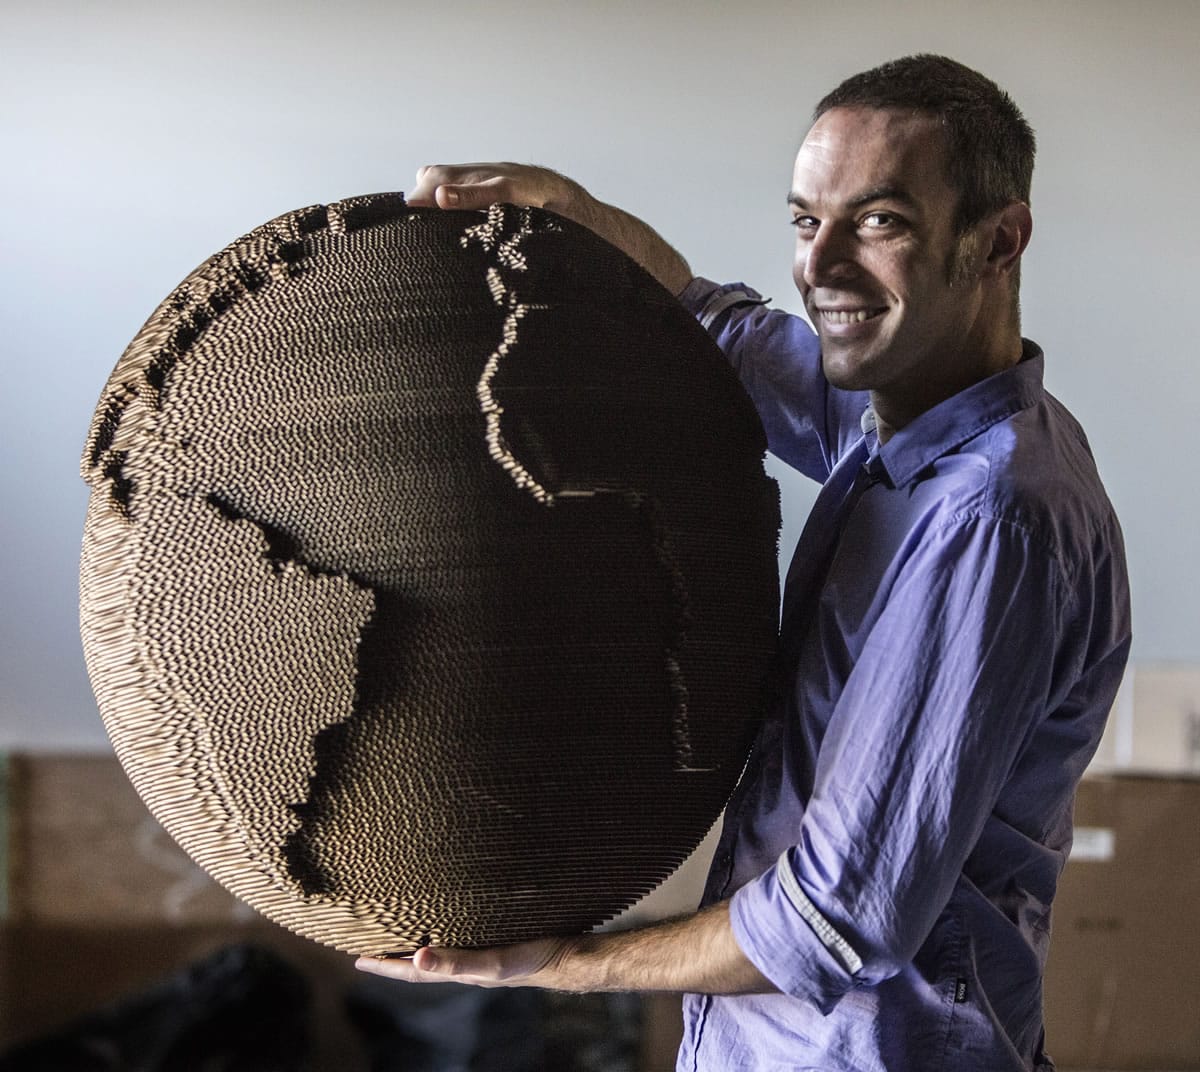 Dan Shapiro founded Glowforge, which makes 3-D laser printers for designers. He&#039;s holding a recycled cardboard lamp made with the printer.